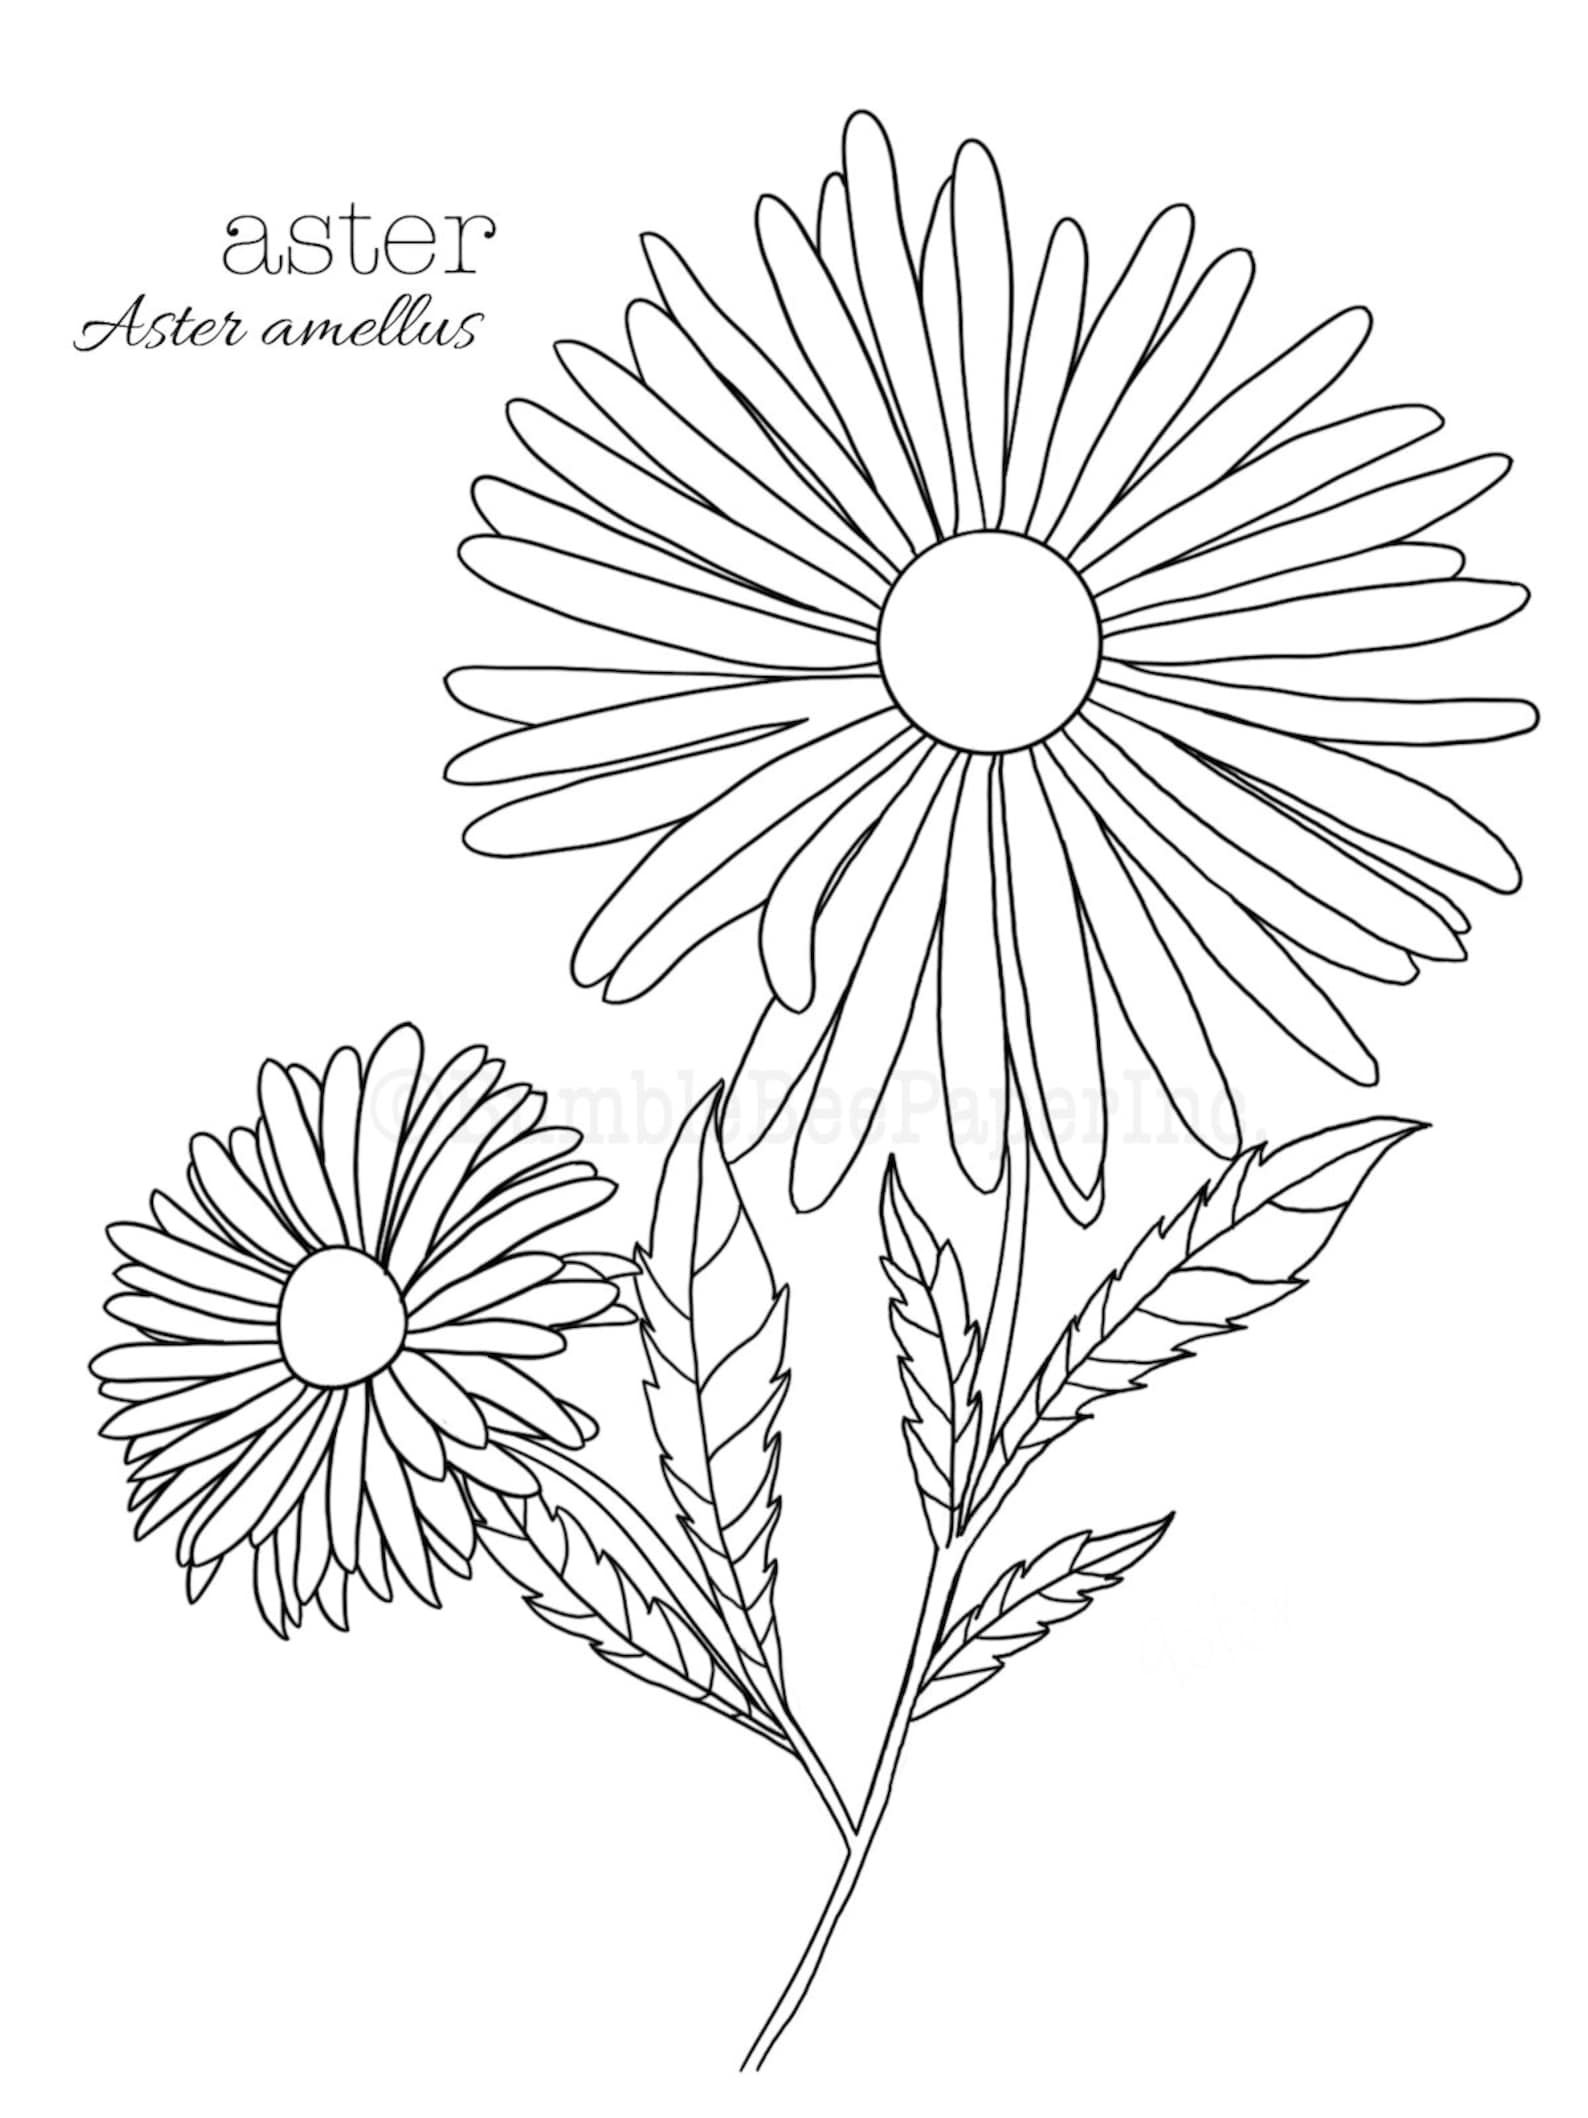 Aster Aster amellus Flower Coloring Page/Wall Art | Etsy